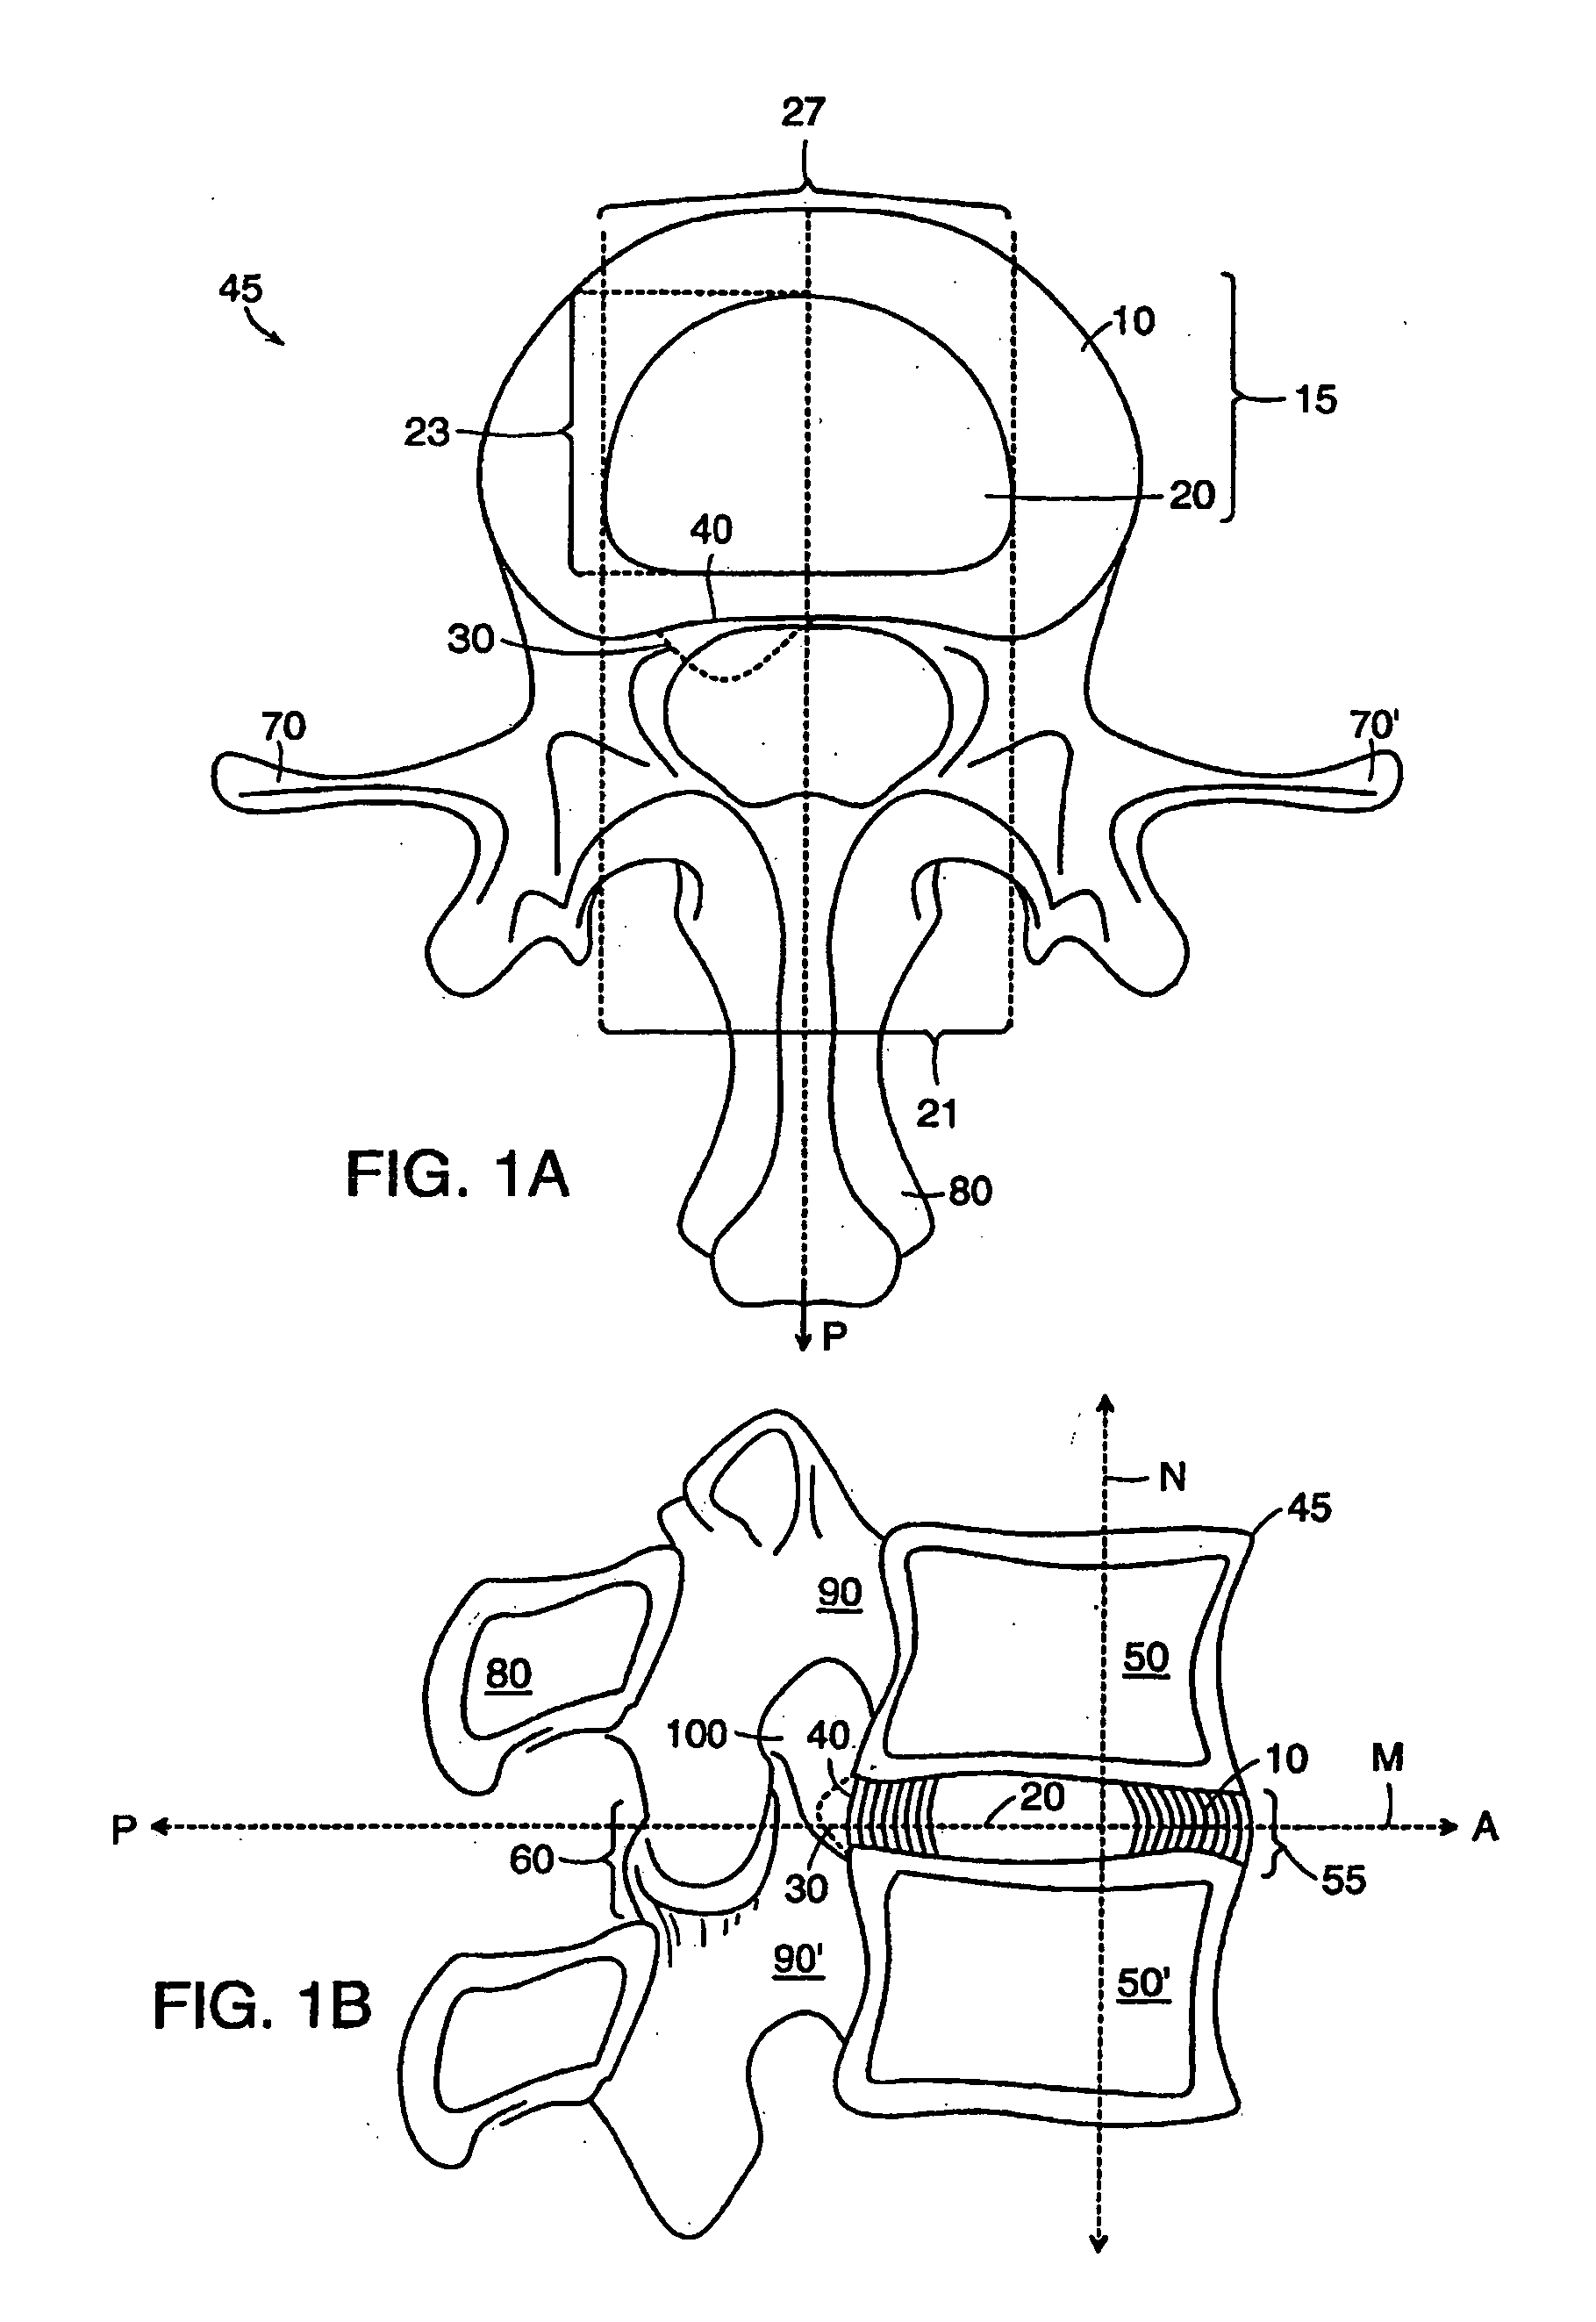 Method of implanting a dynamically stable spinal implant